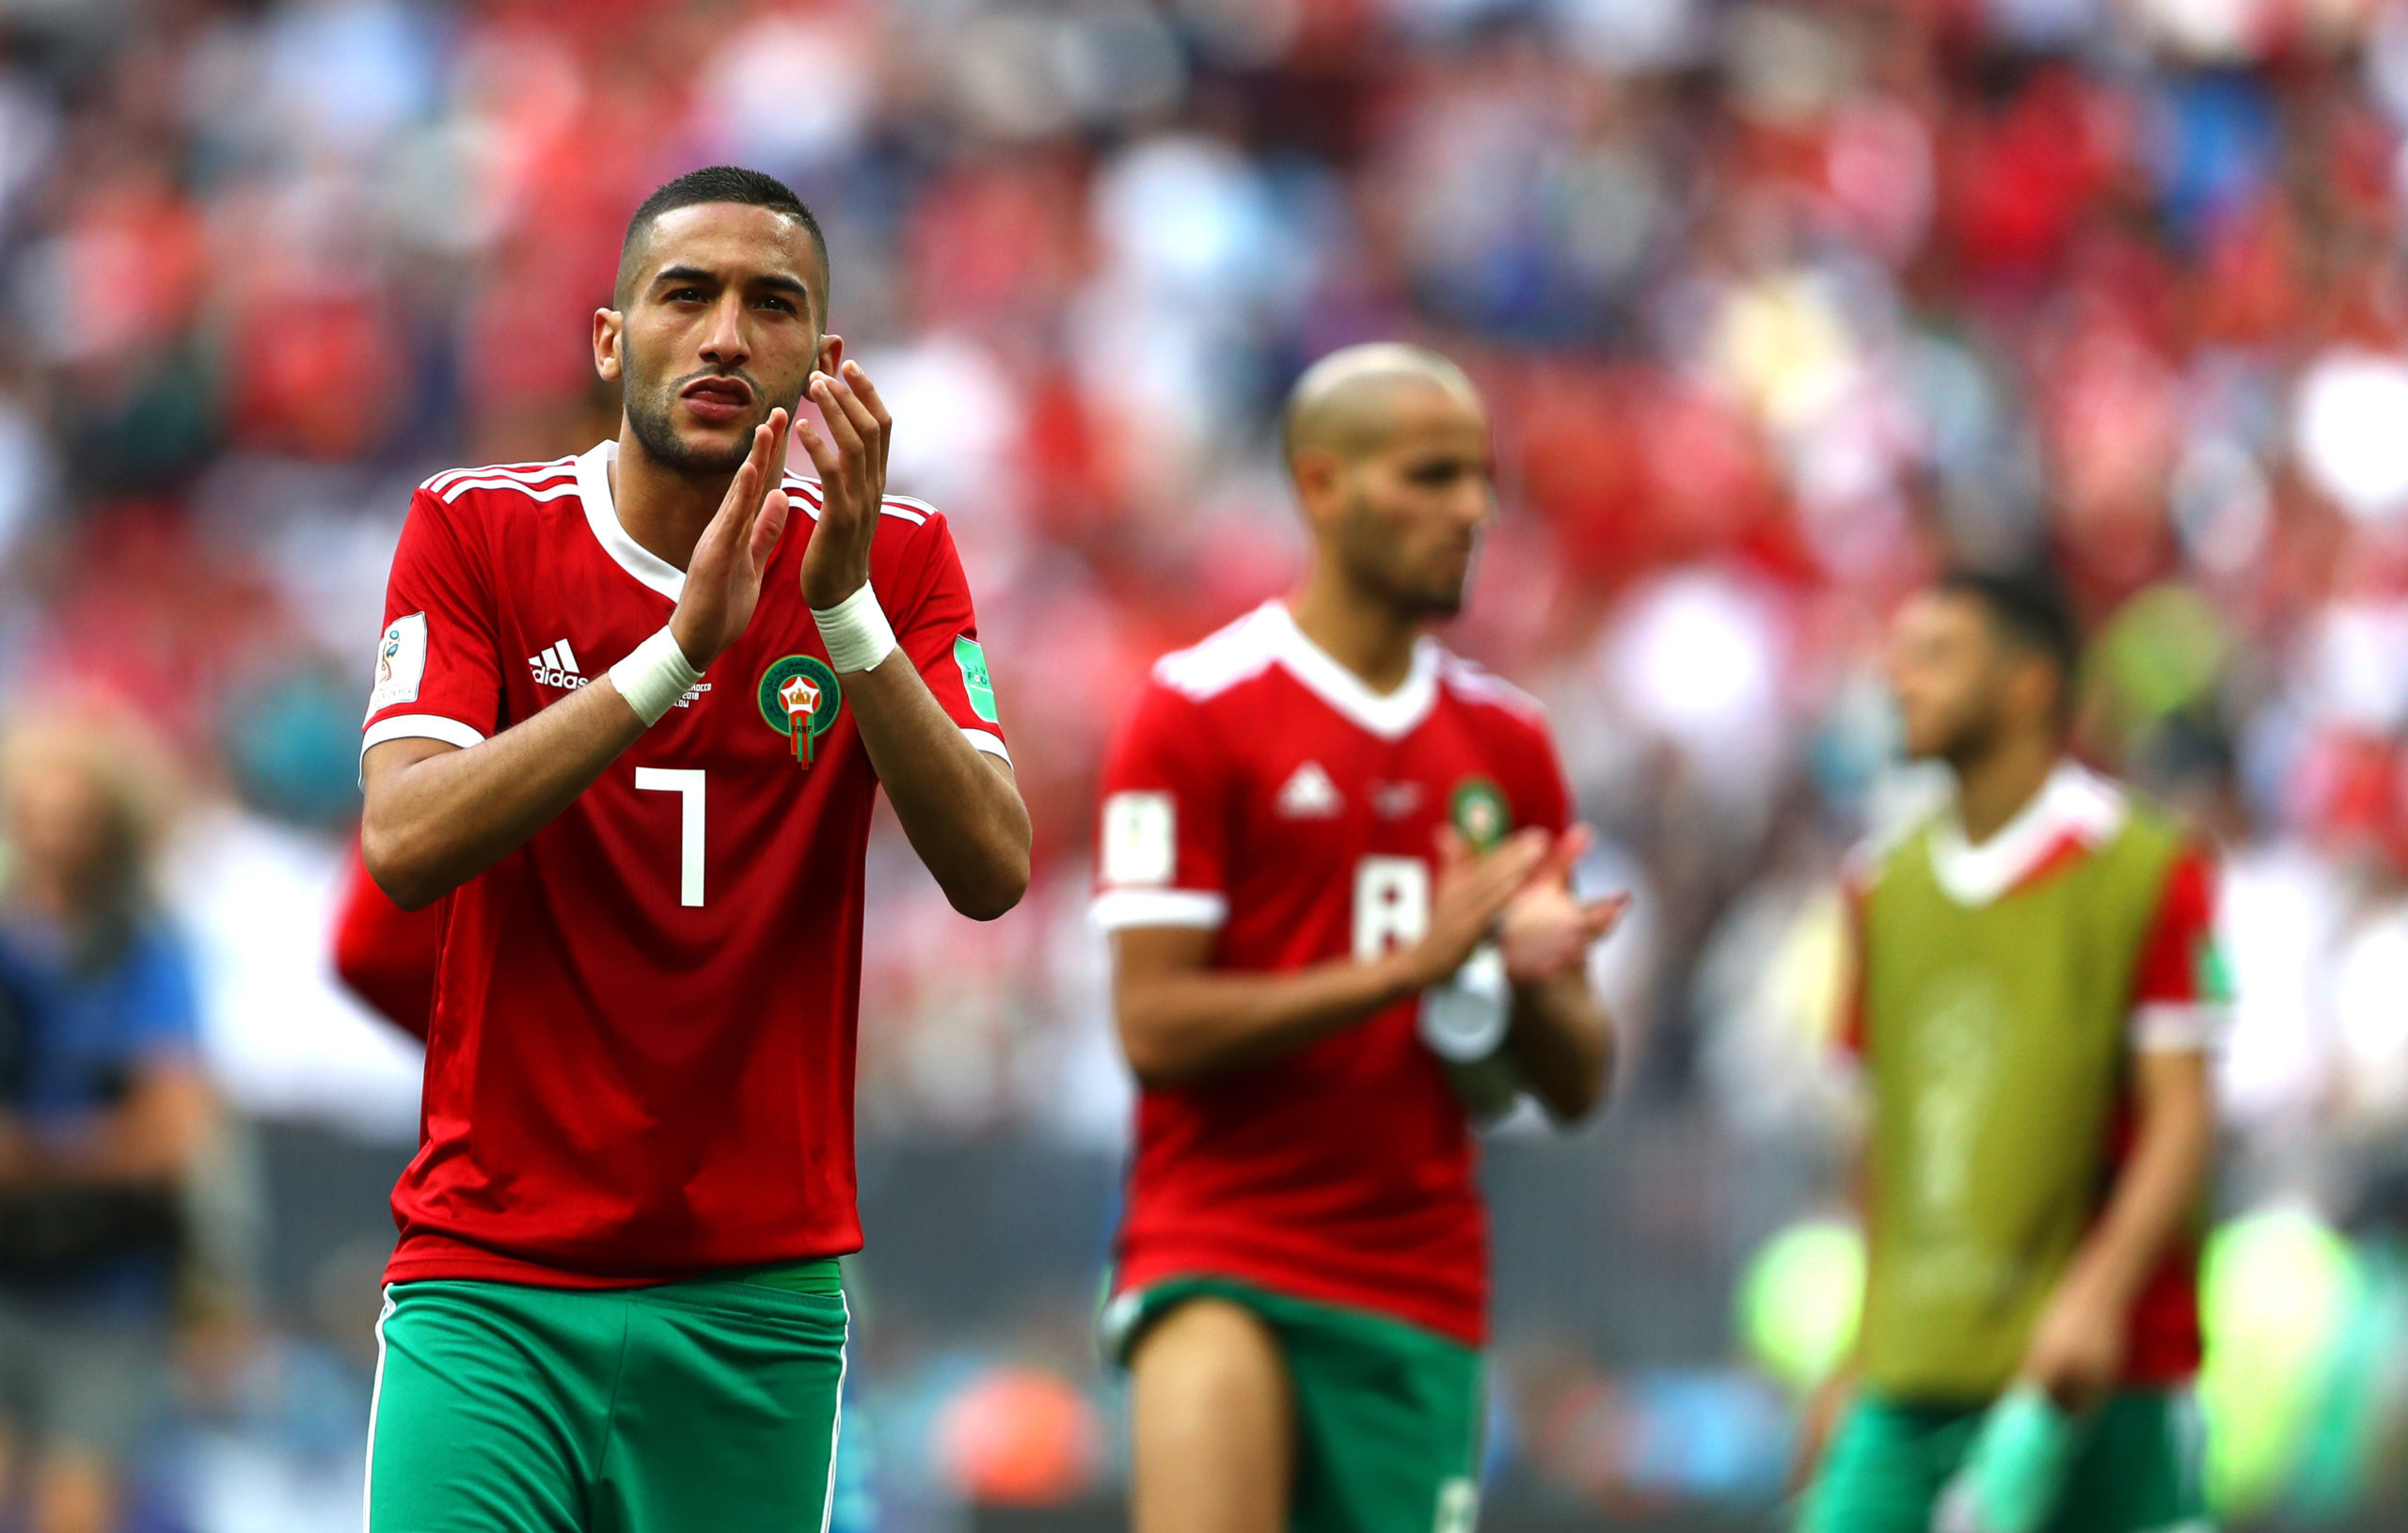 MOSCOW, RUSSIA - JUNE 20: Hakim Ziyach of Morocco acknowledges the fans afer his team's elimination following the 2018 FIFA World Cup Russia group B match between Portugal and Morocco at Luzhniki Stadium on June 20, 2018 in Moscow, Russia. (Photo by Dean Mouhtaropoulos/Getty Images)